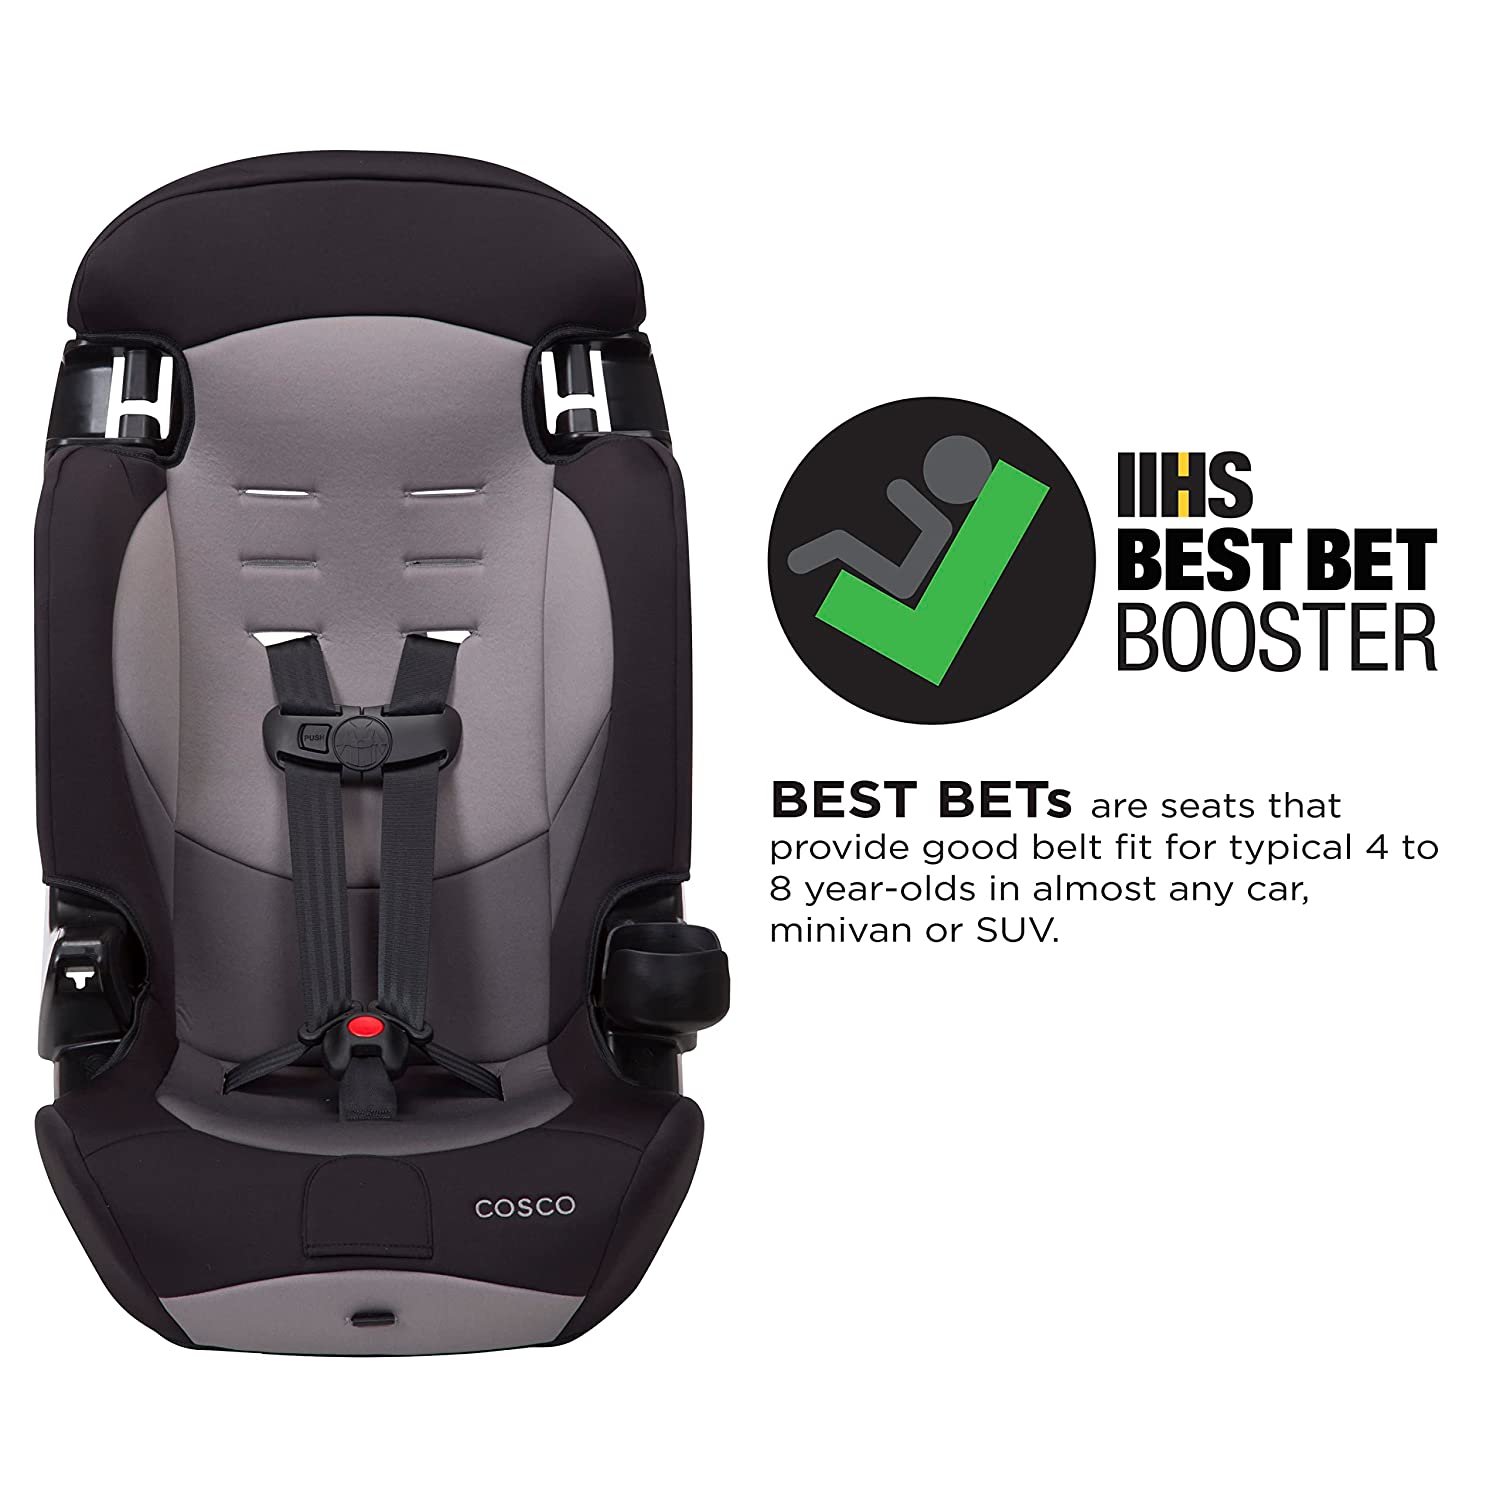 Cosco Finale DX 2-in-1 Booster Car Seat, Rainbow, Toddler - image 5 of 8